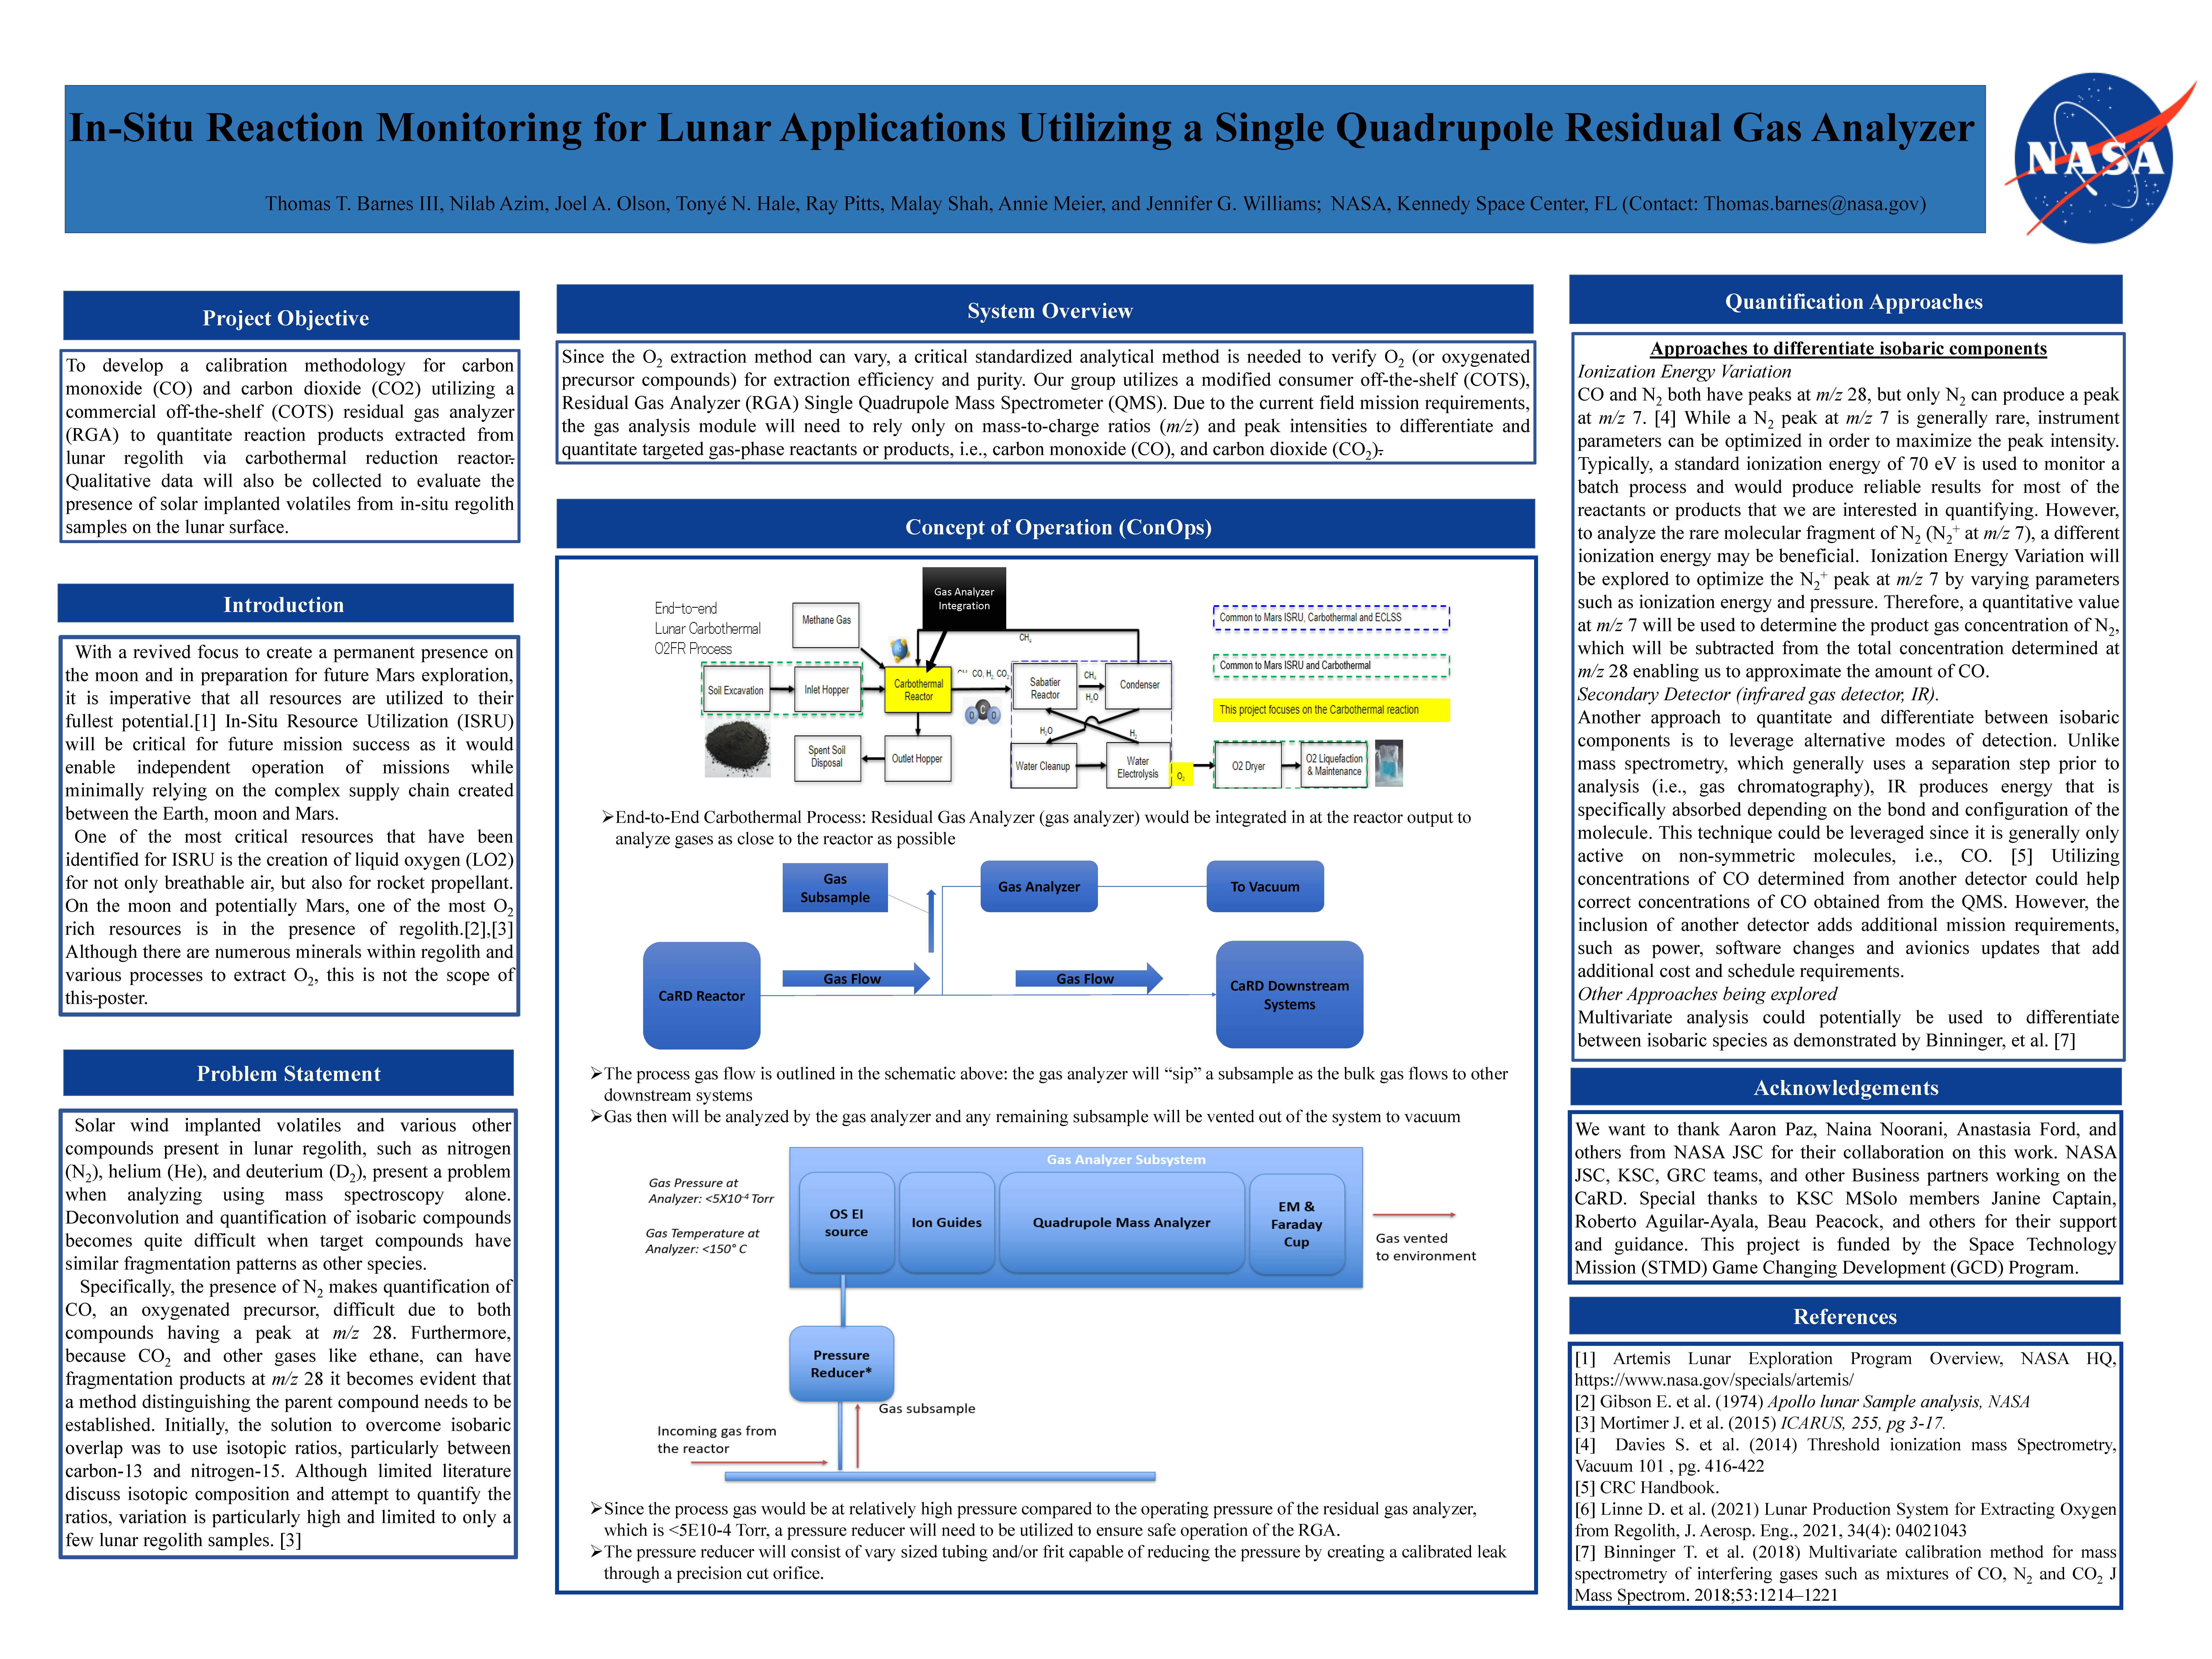 In-Situ Reaction Monitoring for Lunar Applications Utilizing a Single Quadrupole Residual Gas Analyzer